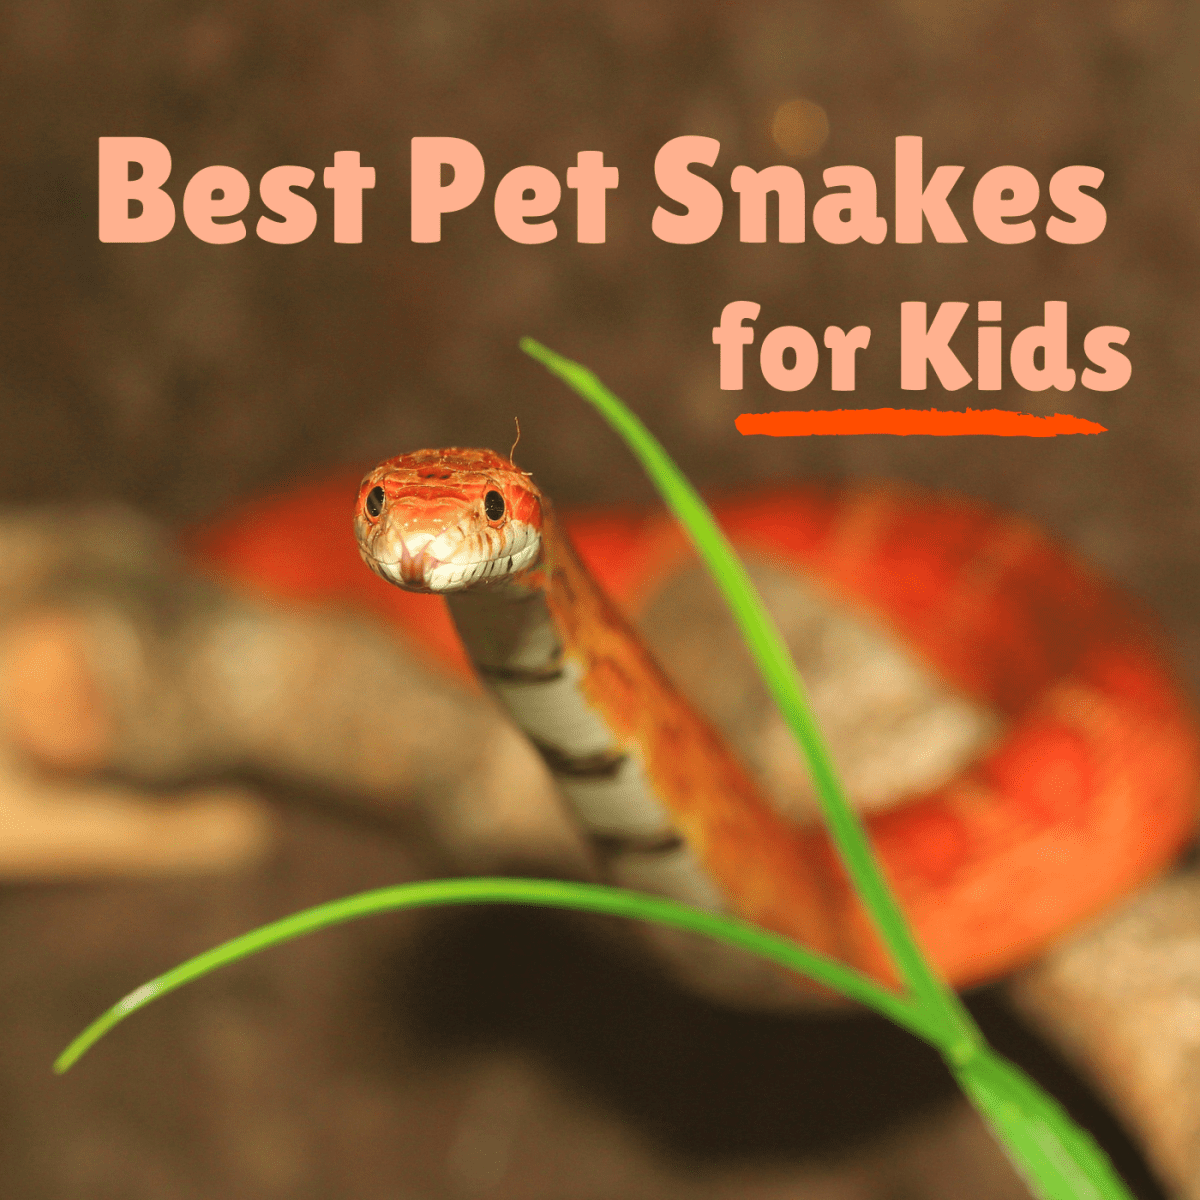 snakes as pets